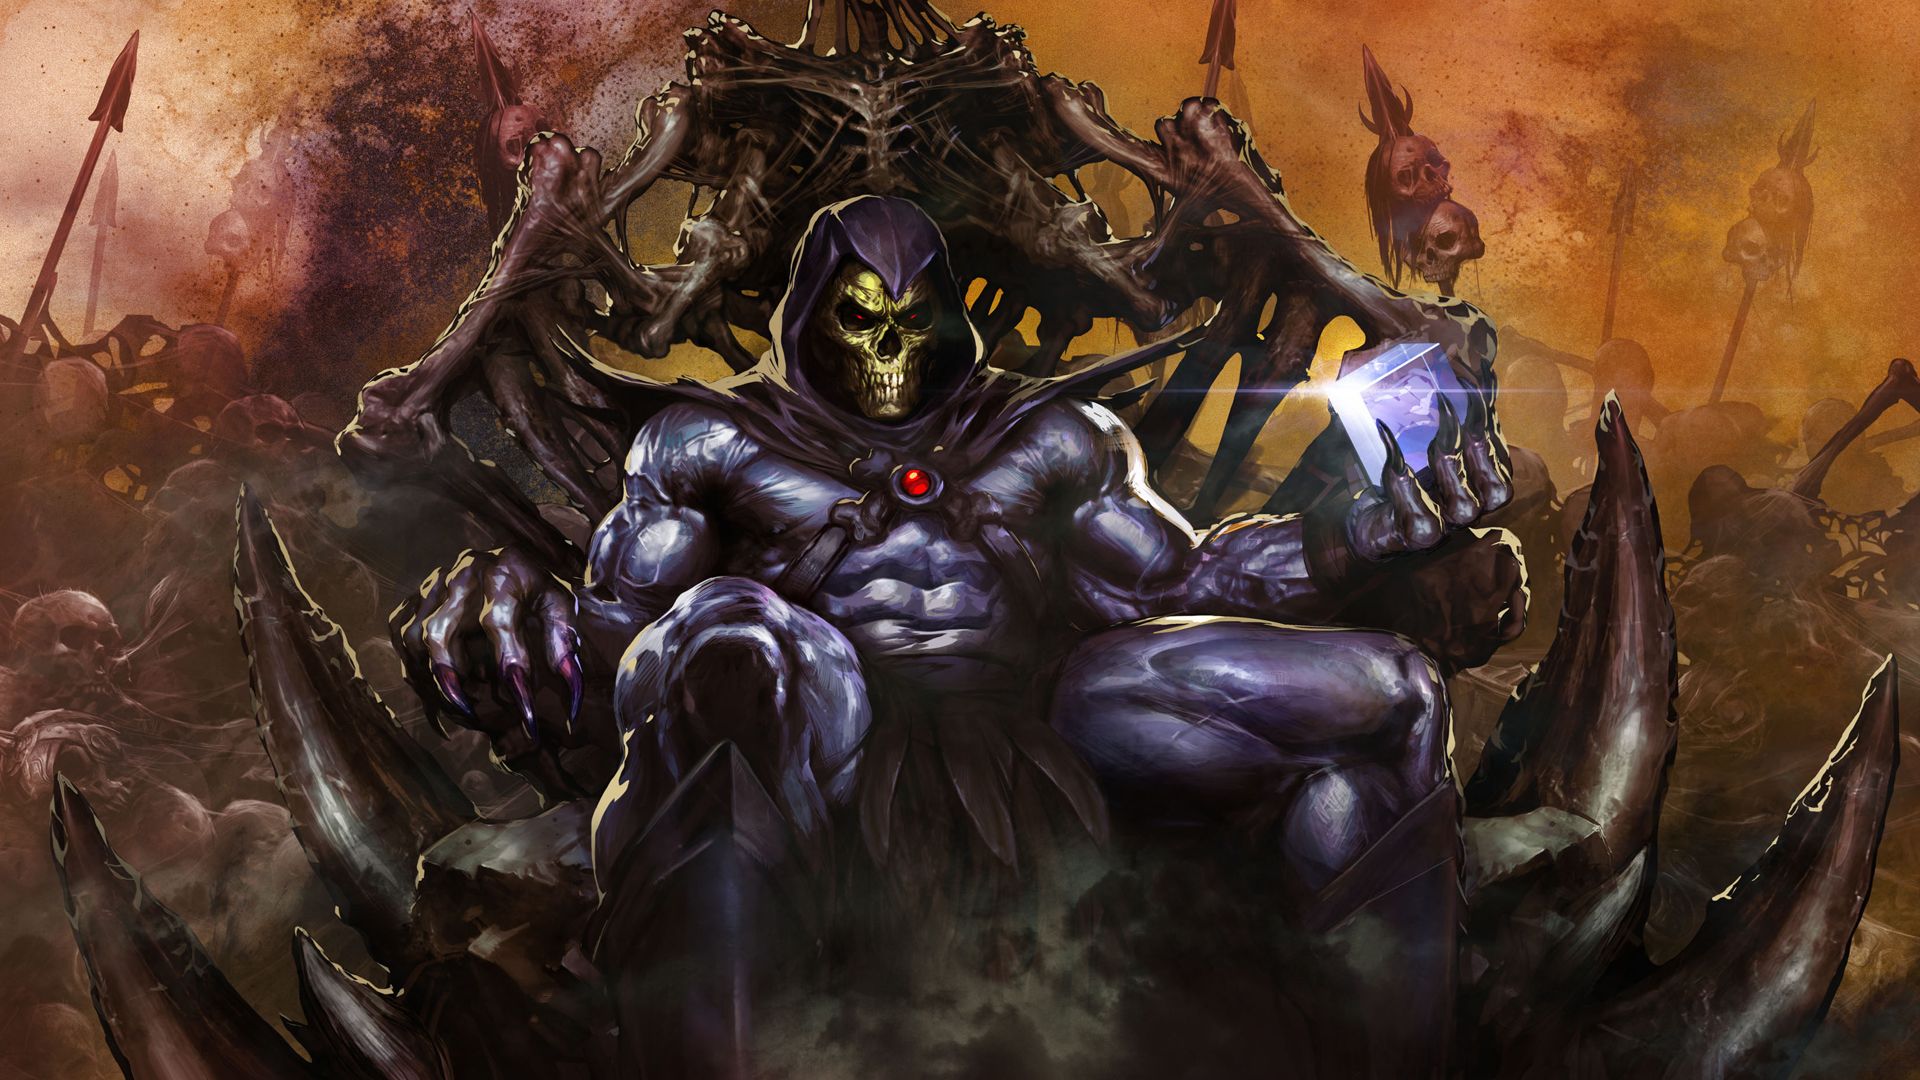 He Man And The Masters Of The Universe Wallpaper 6. Masters Of The Universe, Skeletor, Skeletor Heman